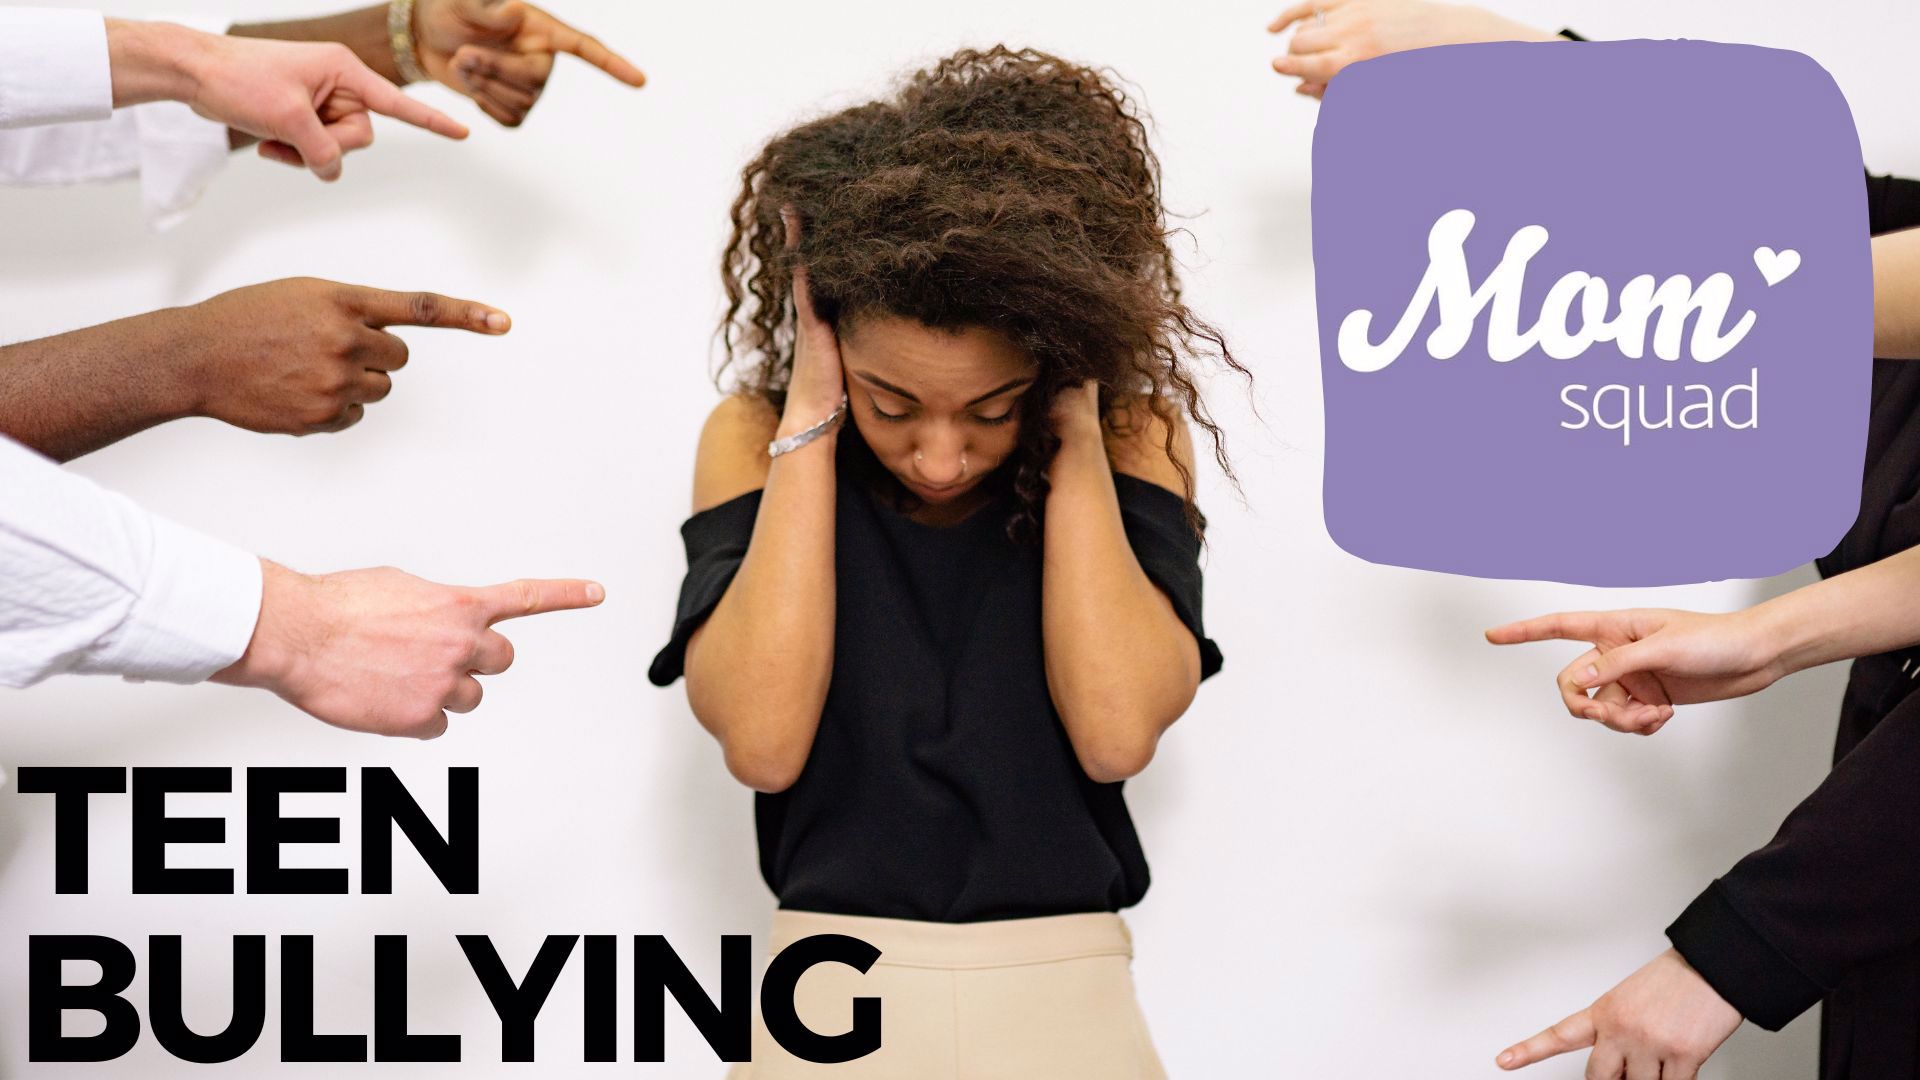 WKYC's Maureen Kyle discusses mental health and teen bullying. Signs to look out for and how to have tough discussions with your teens.